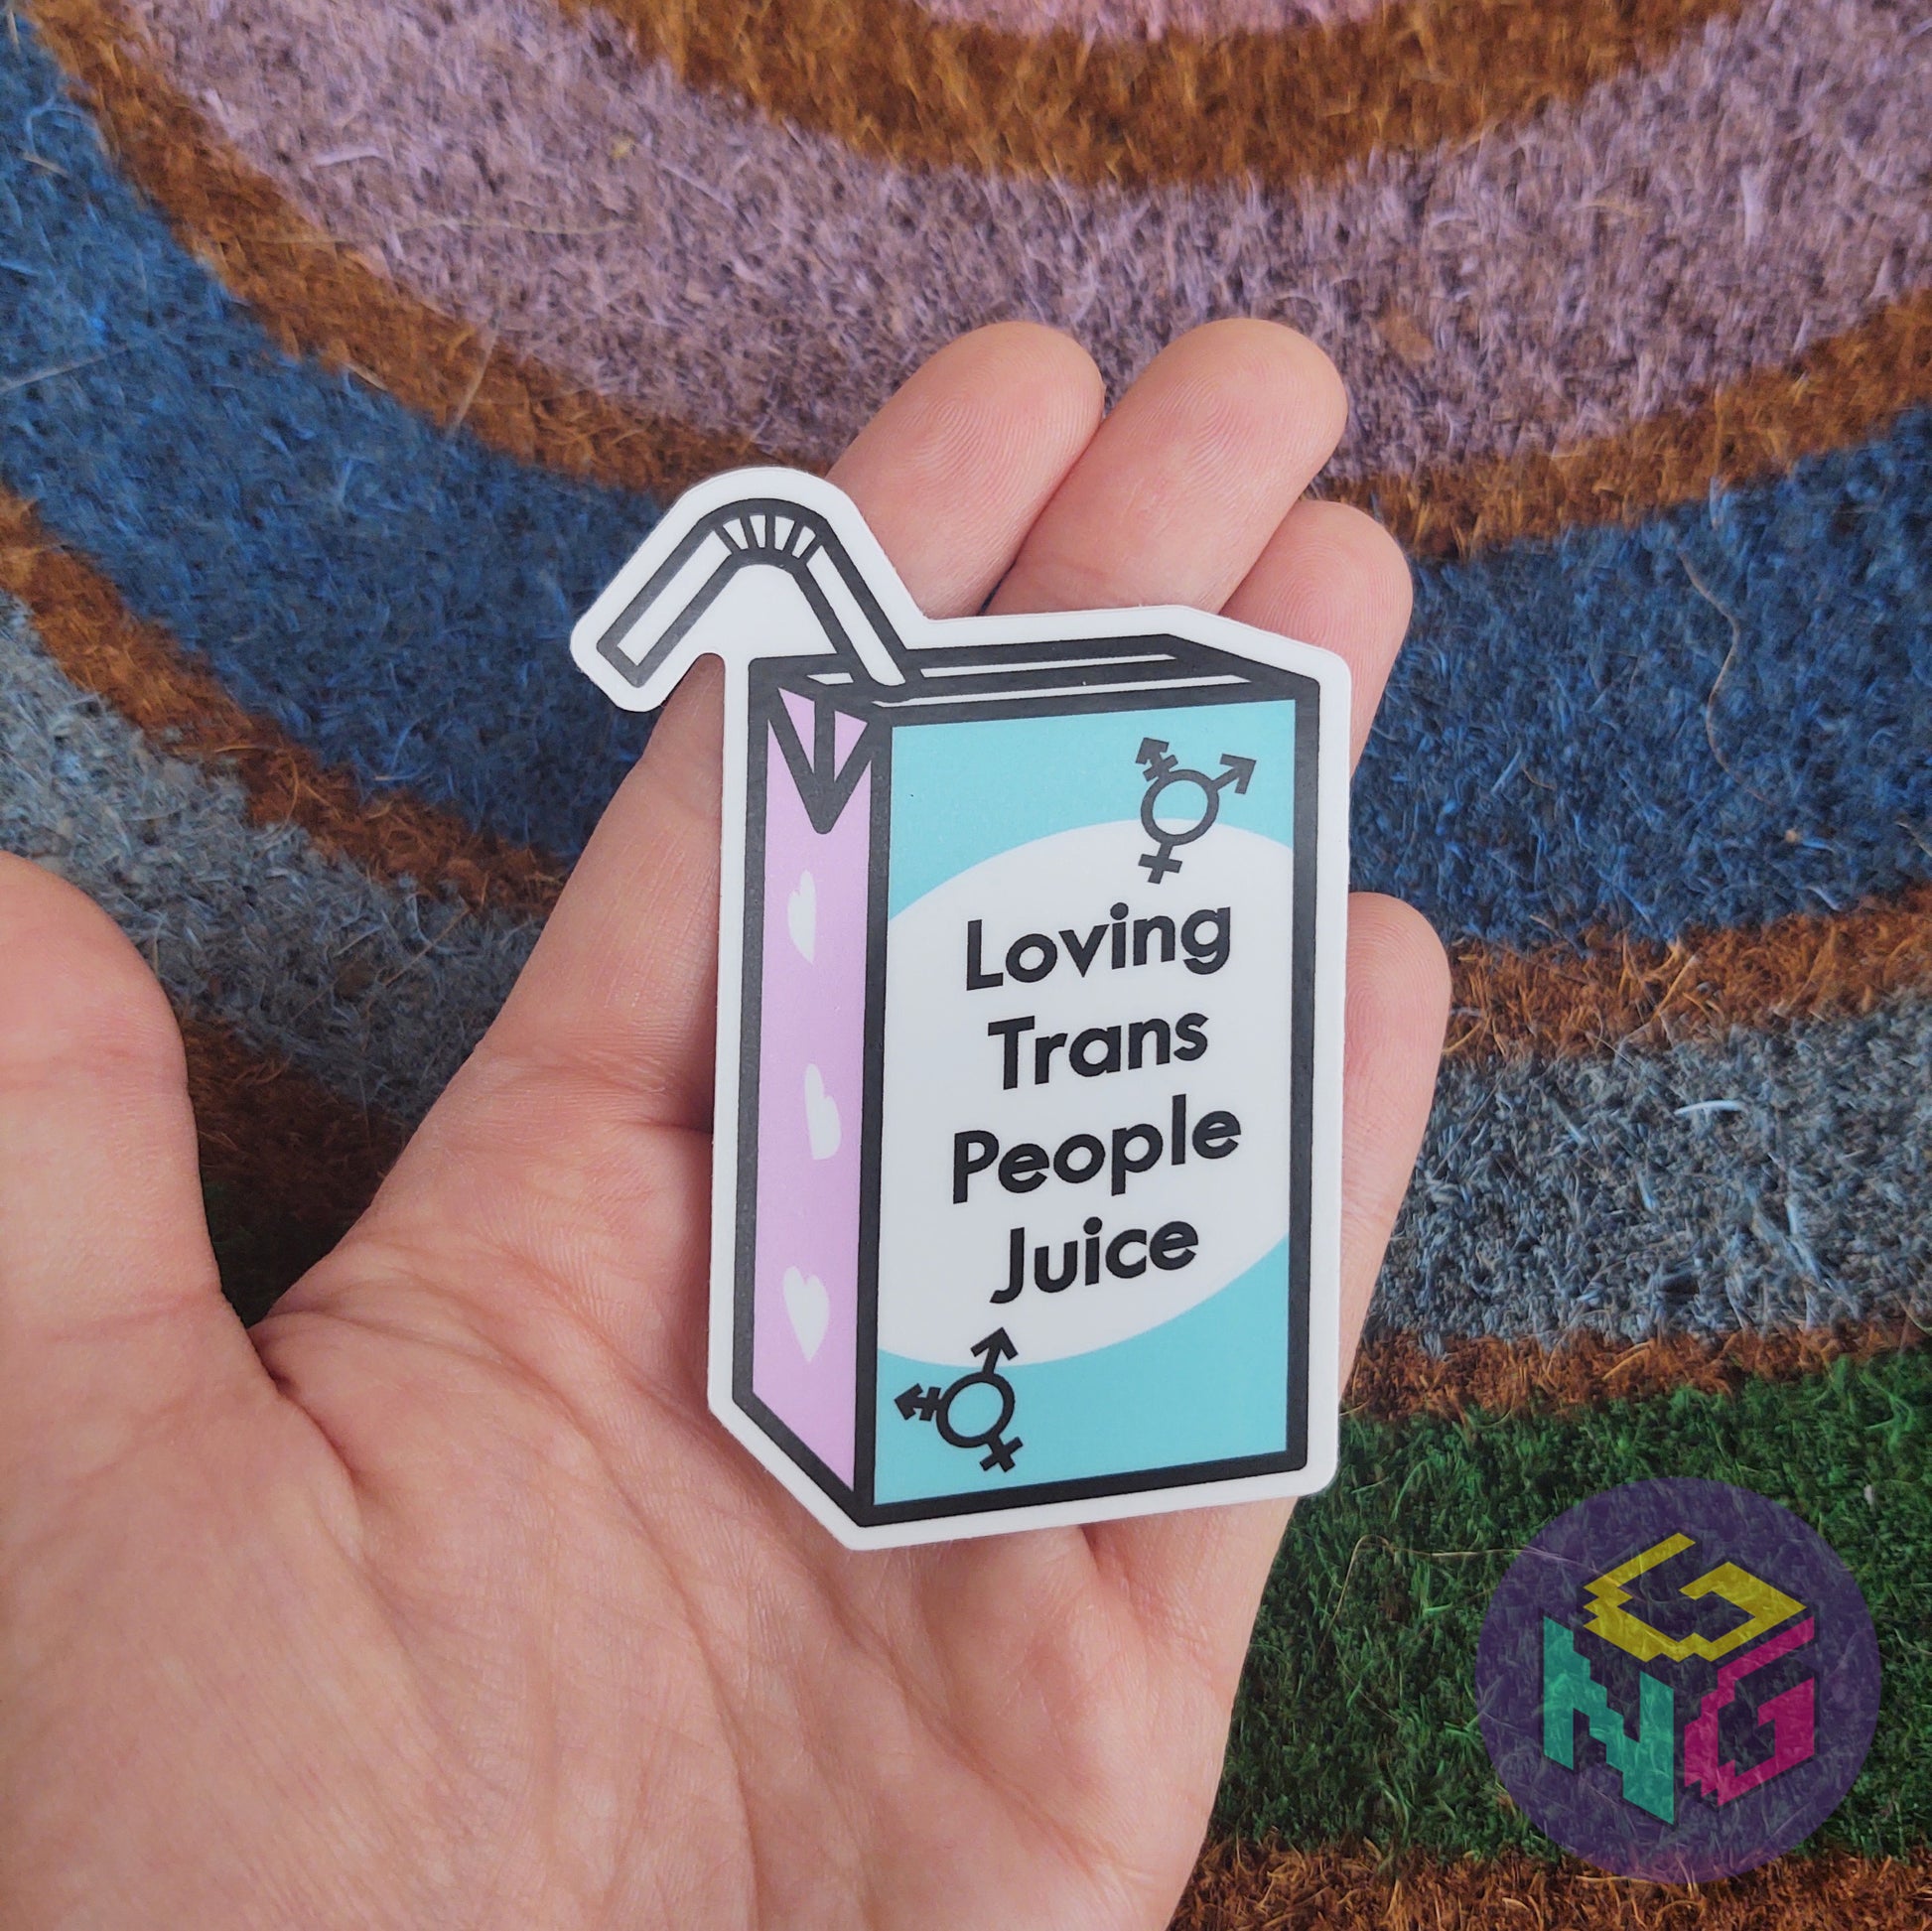 loving trans people juice sticker being held in hand in front of rainbow welcome mat